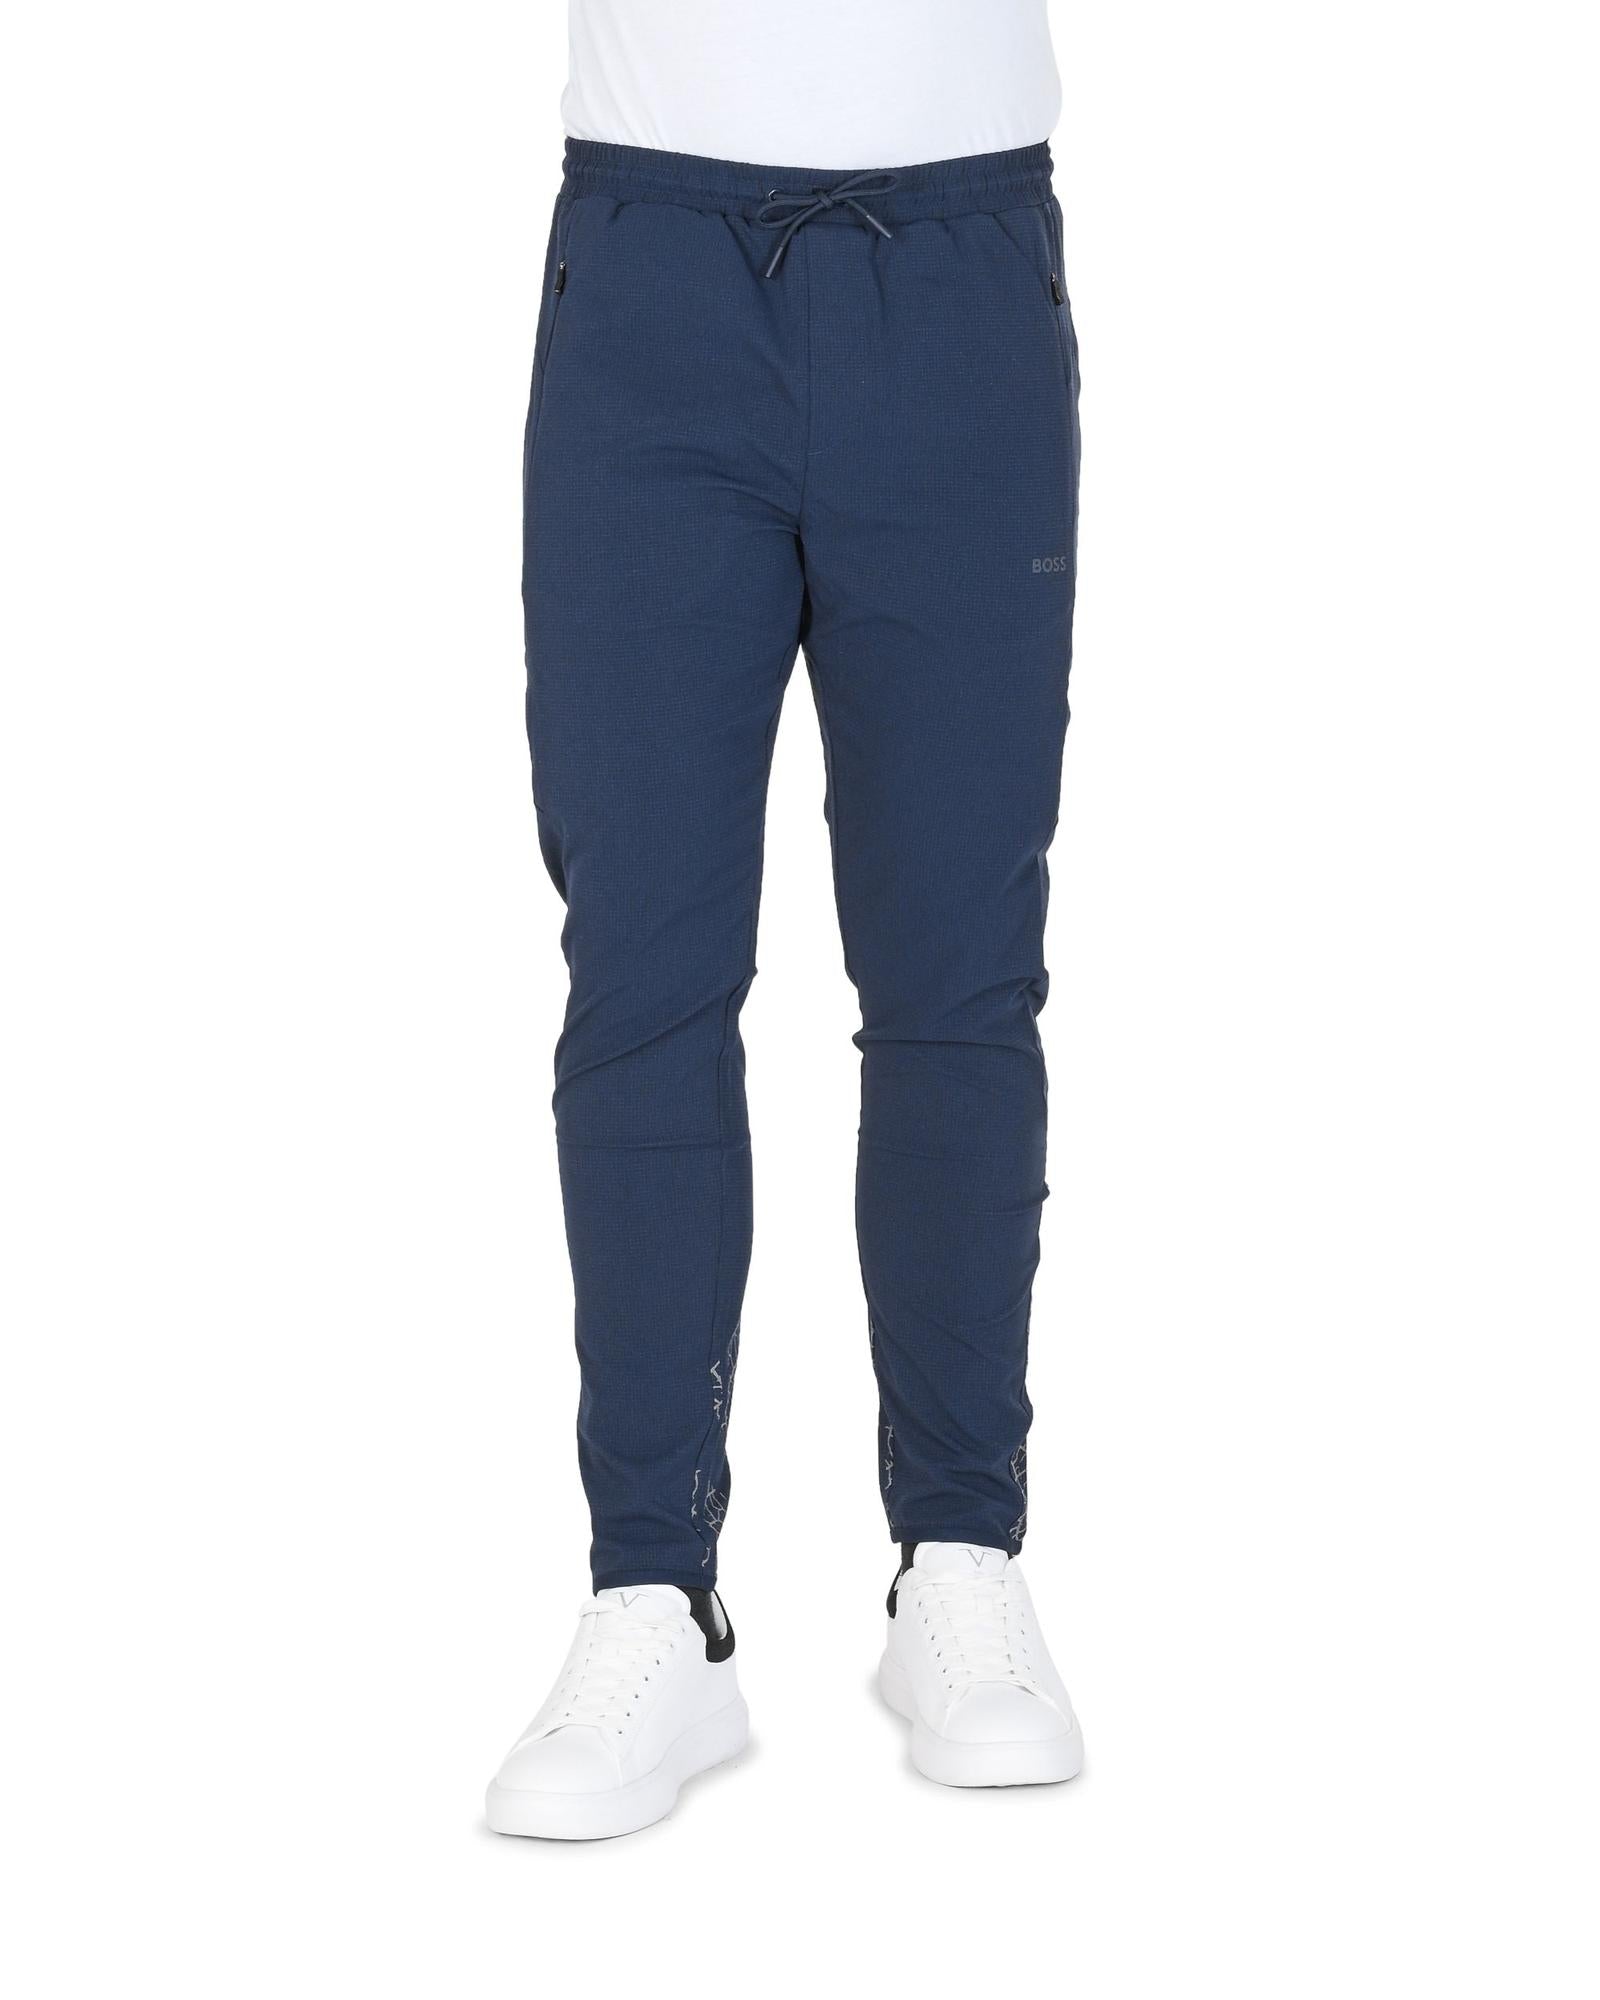 Men's Recycled Polyester Navy Pants in Navy blue - XL